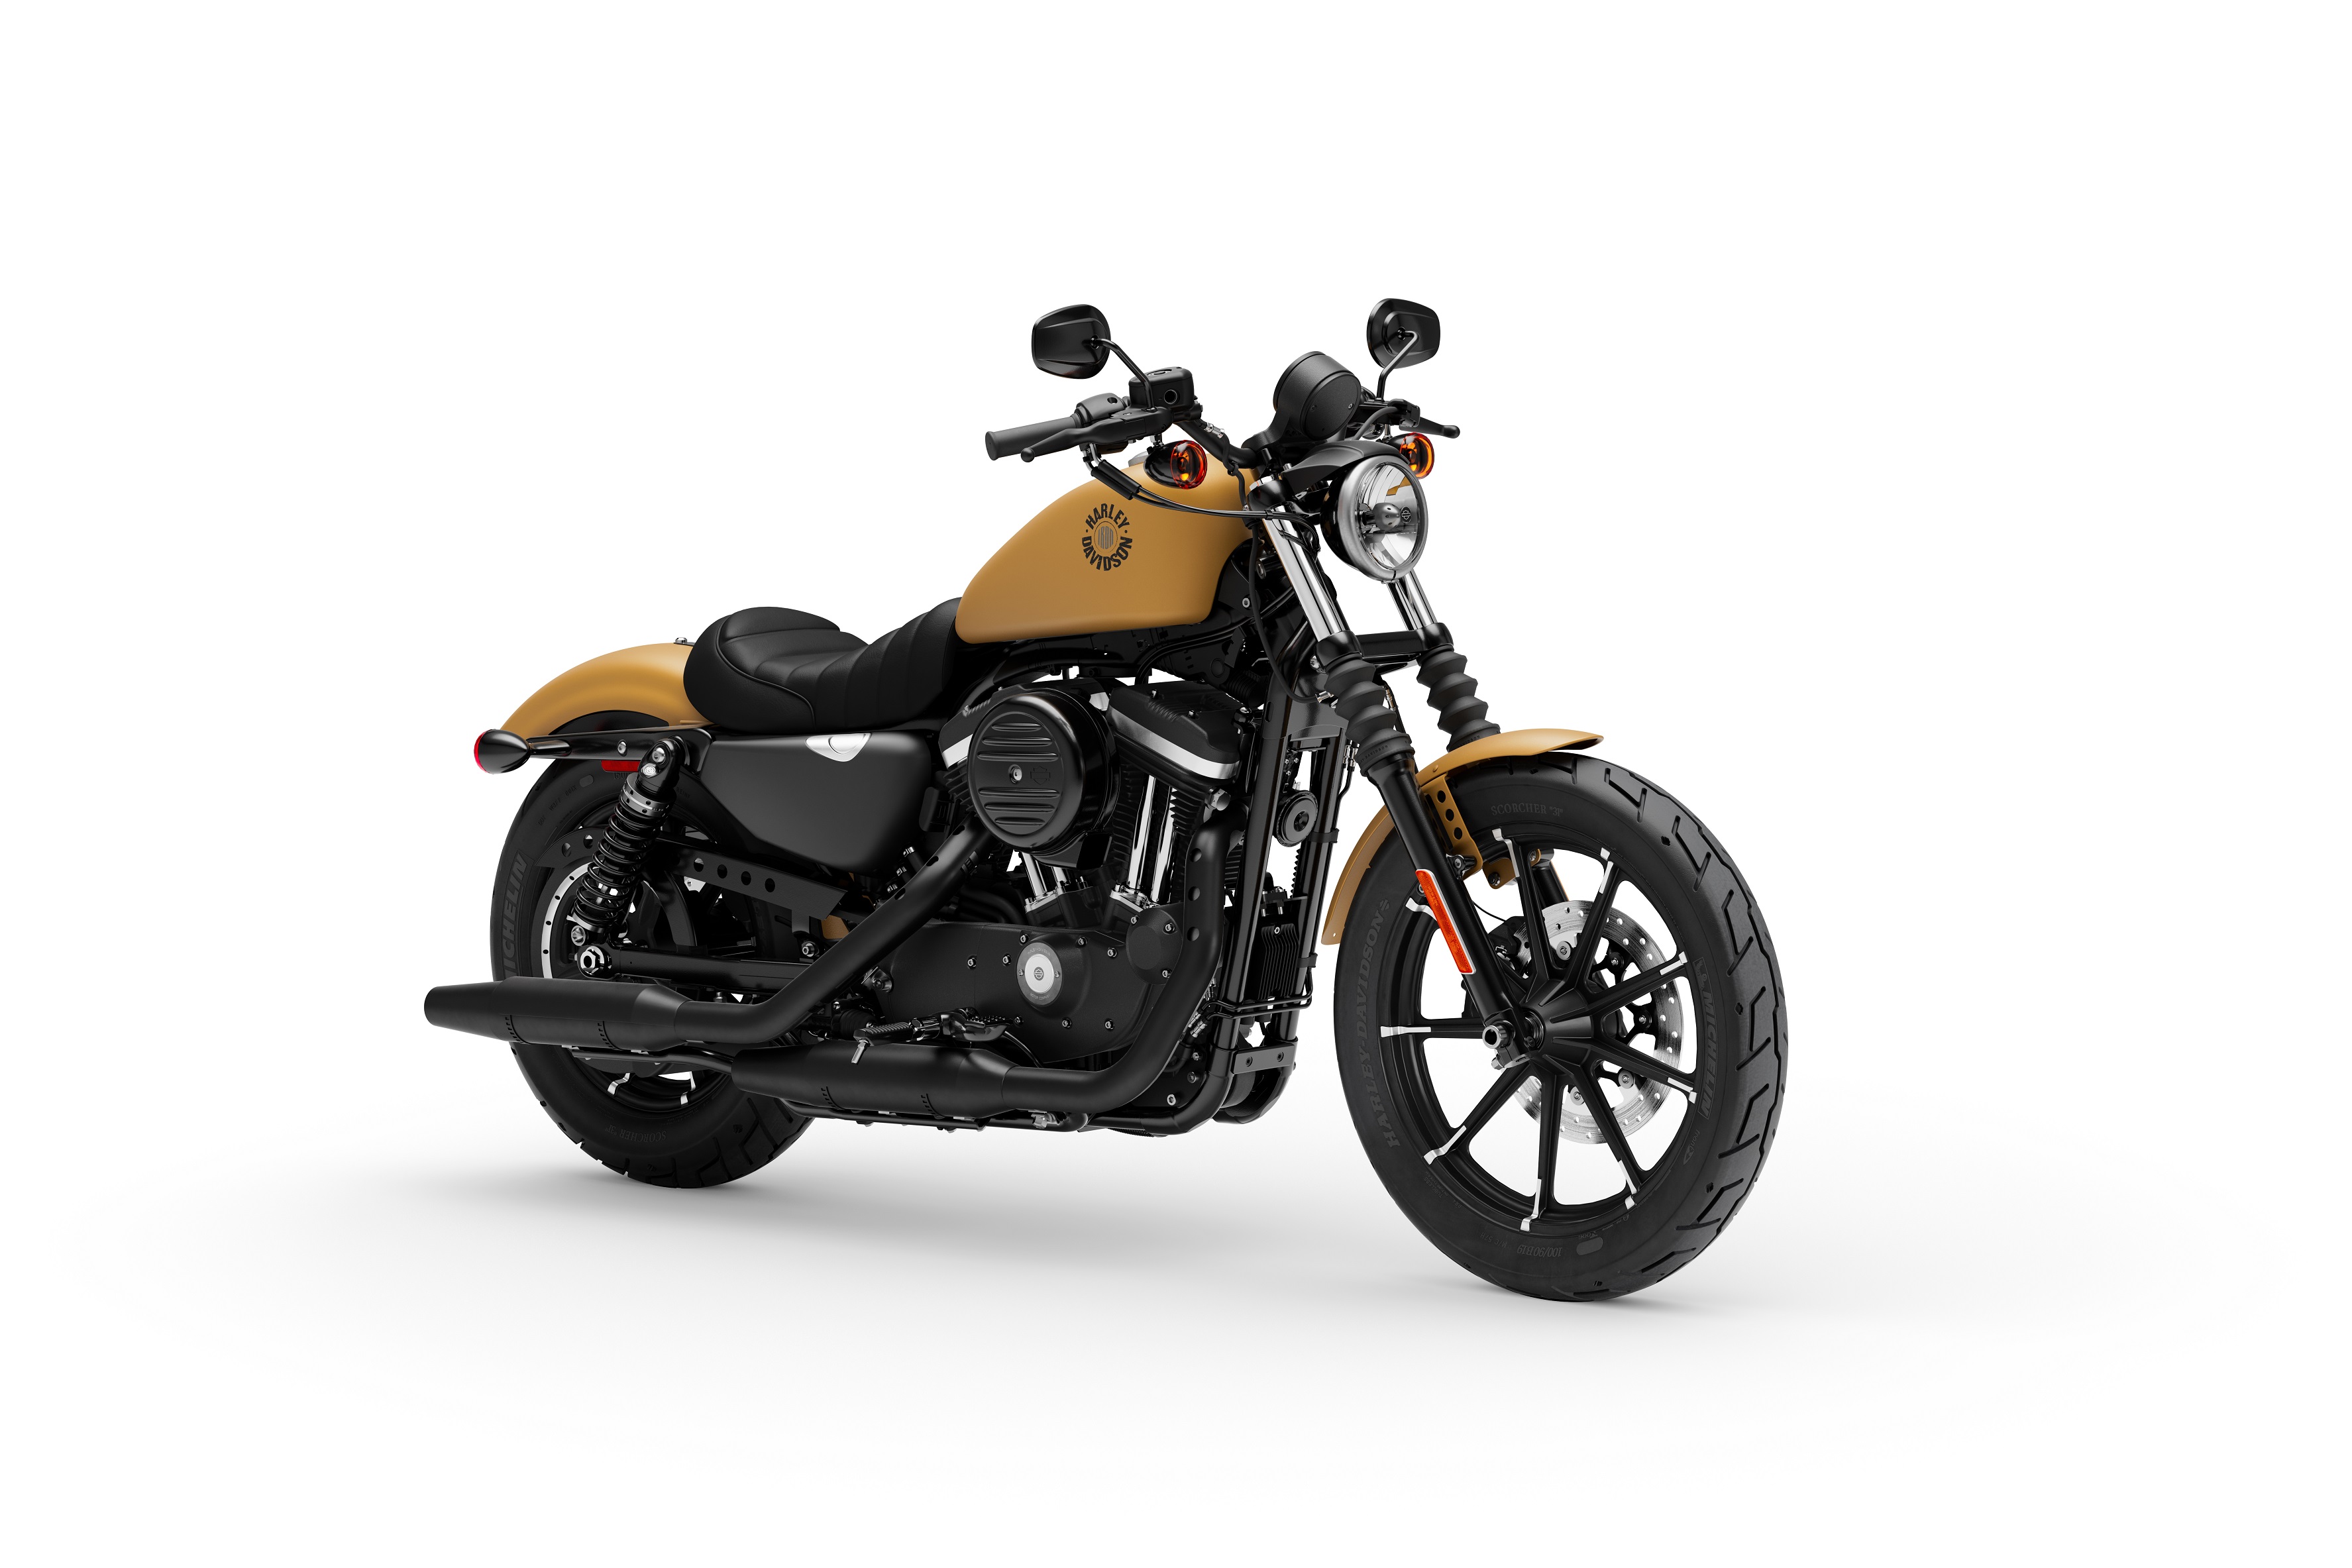 2020 Harley 883 Iron For Sale Promotion Off59